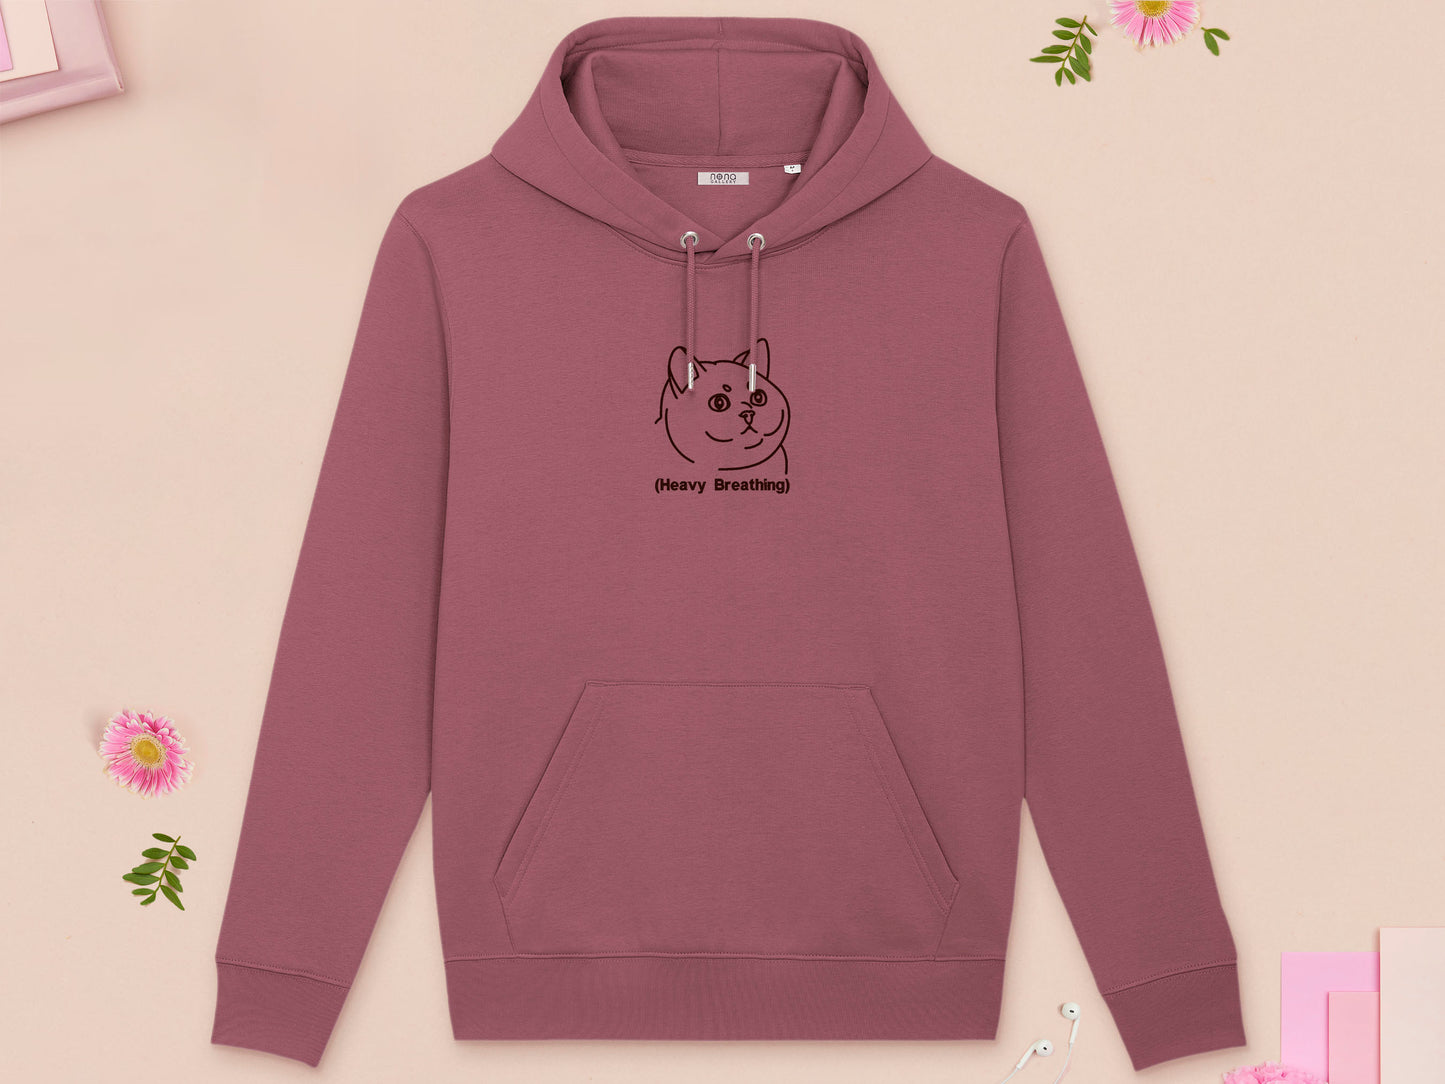 A red long sleeve fleece hoodie, with an embroidered brown thread design of cute fat cat portrait with text underneath saying (Heavy Breathing)